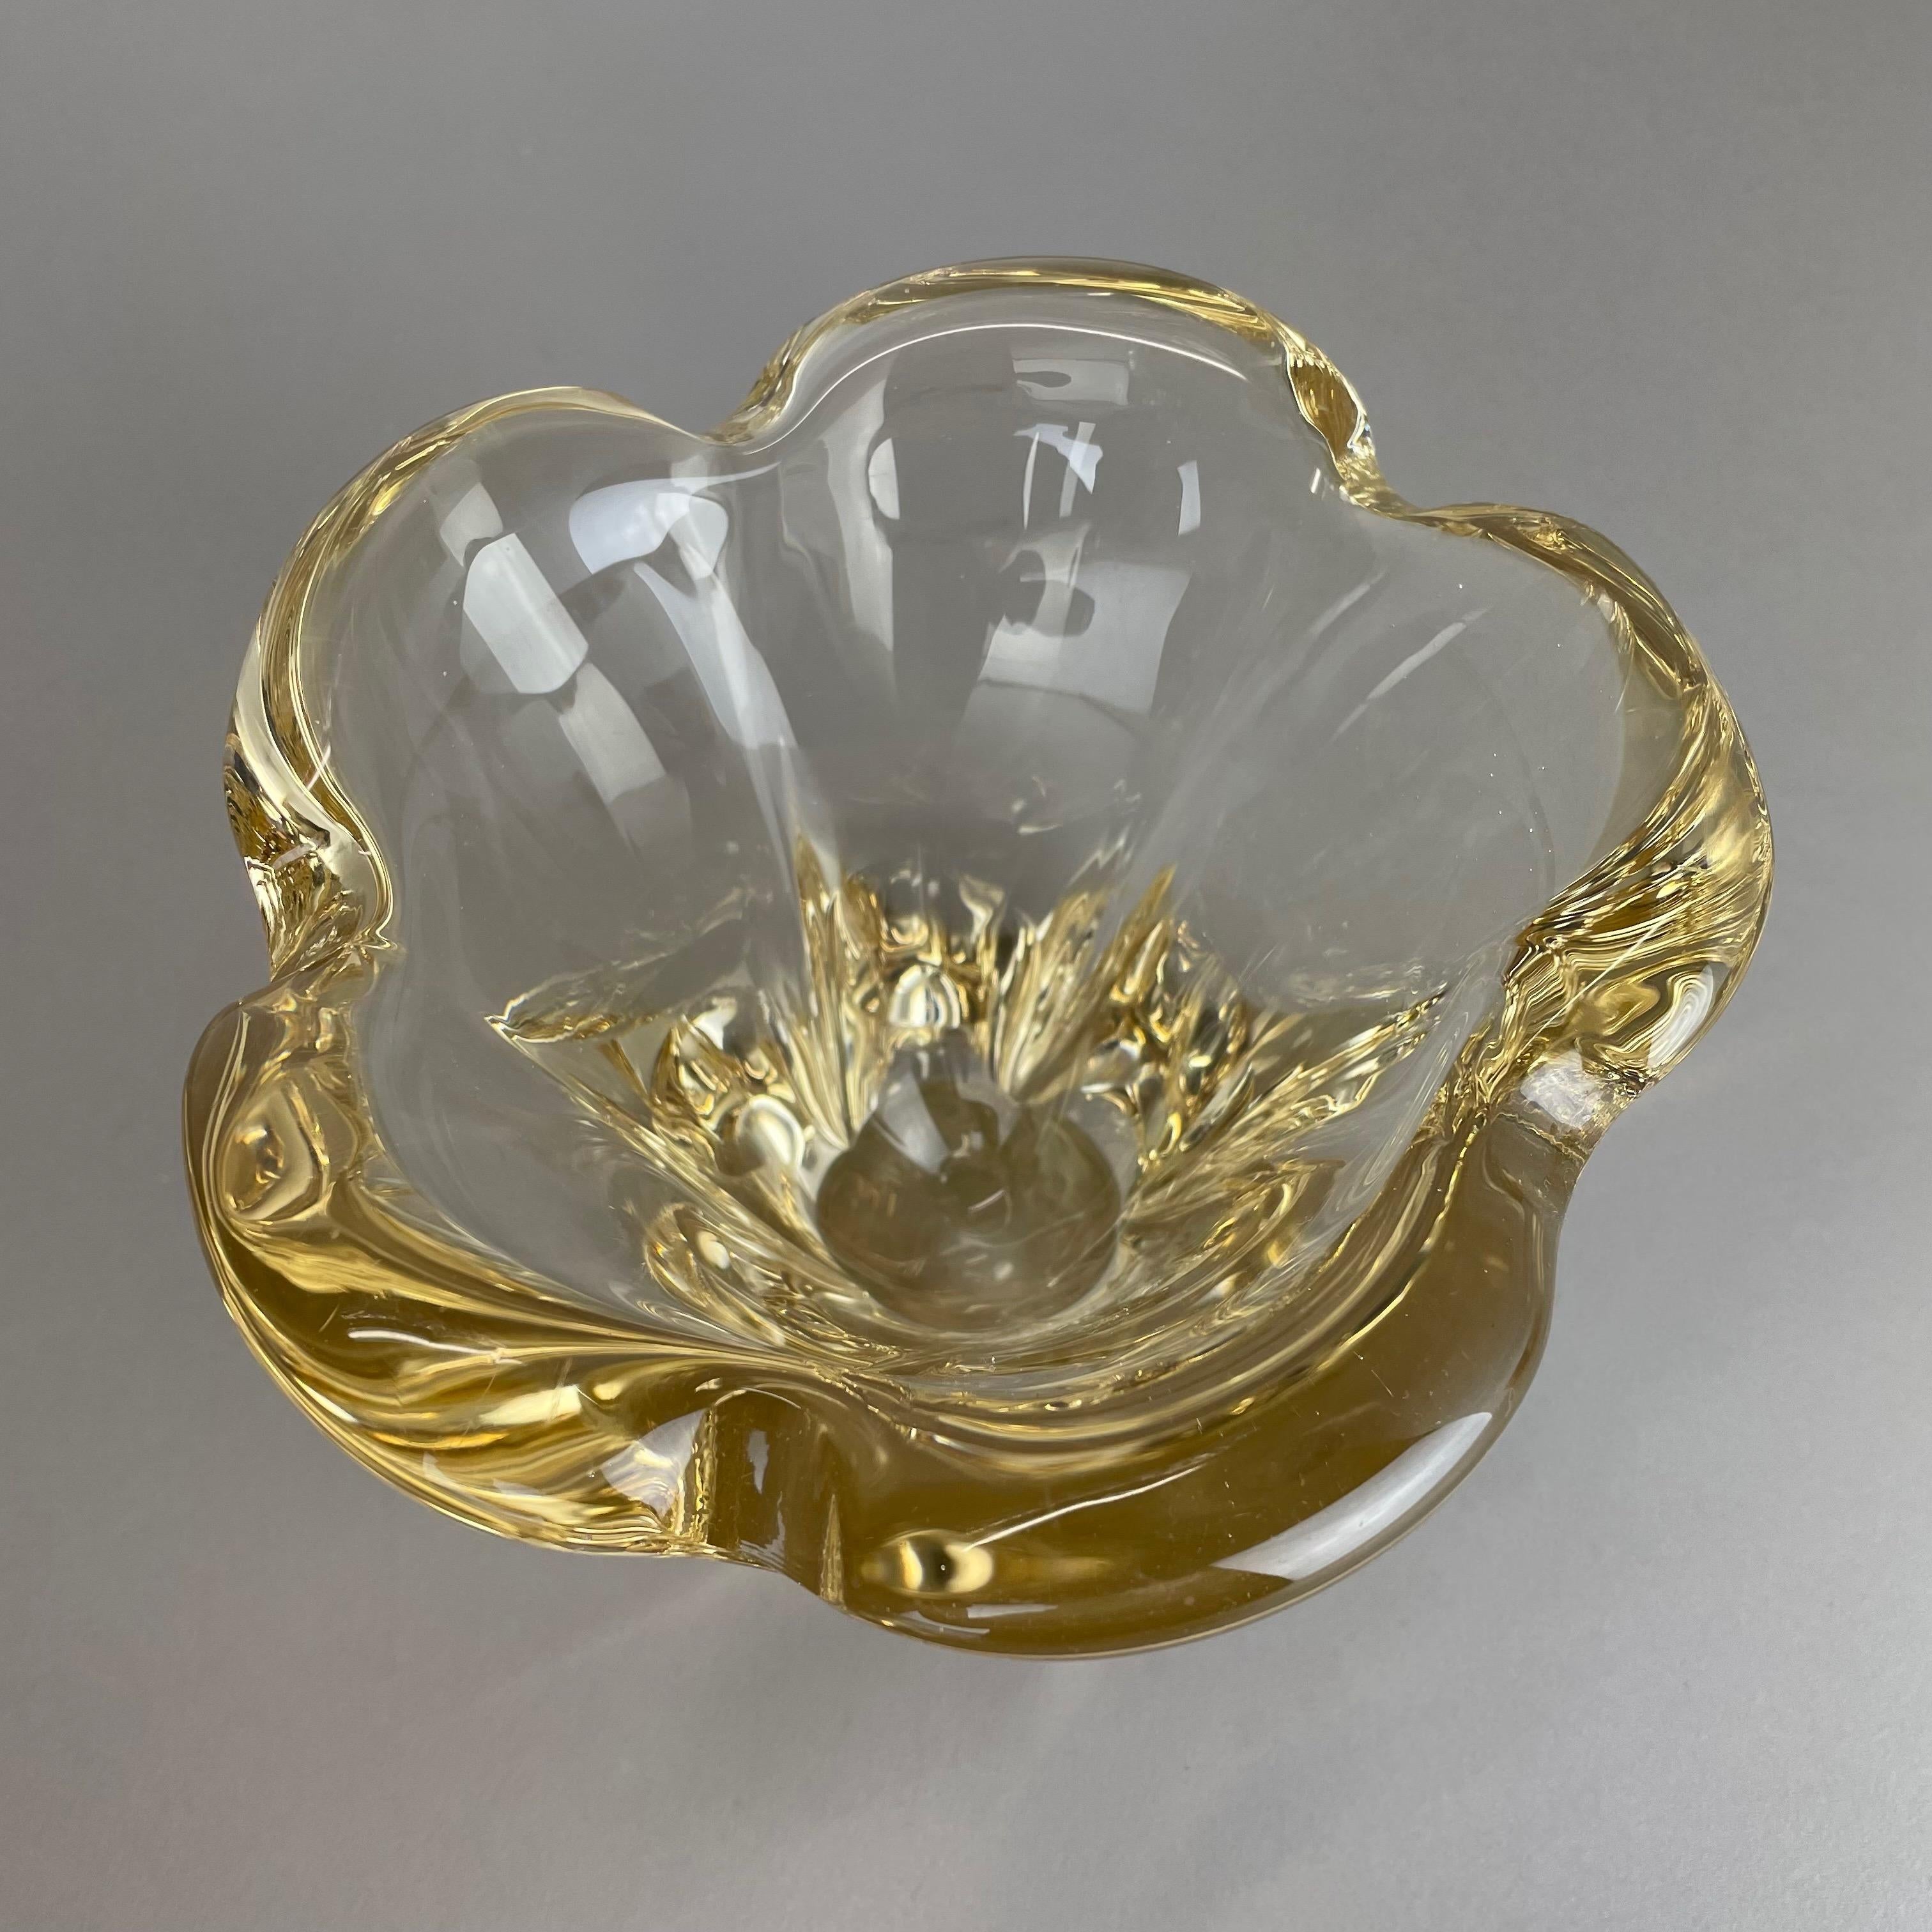 Large 3kg Crystal Glass Centerpiece Shell Bowl by DAUM Nancy, France, 1970s For Sale 3